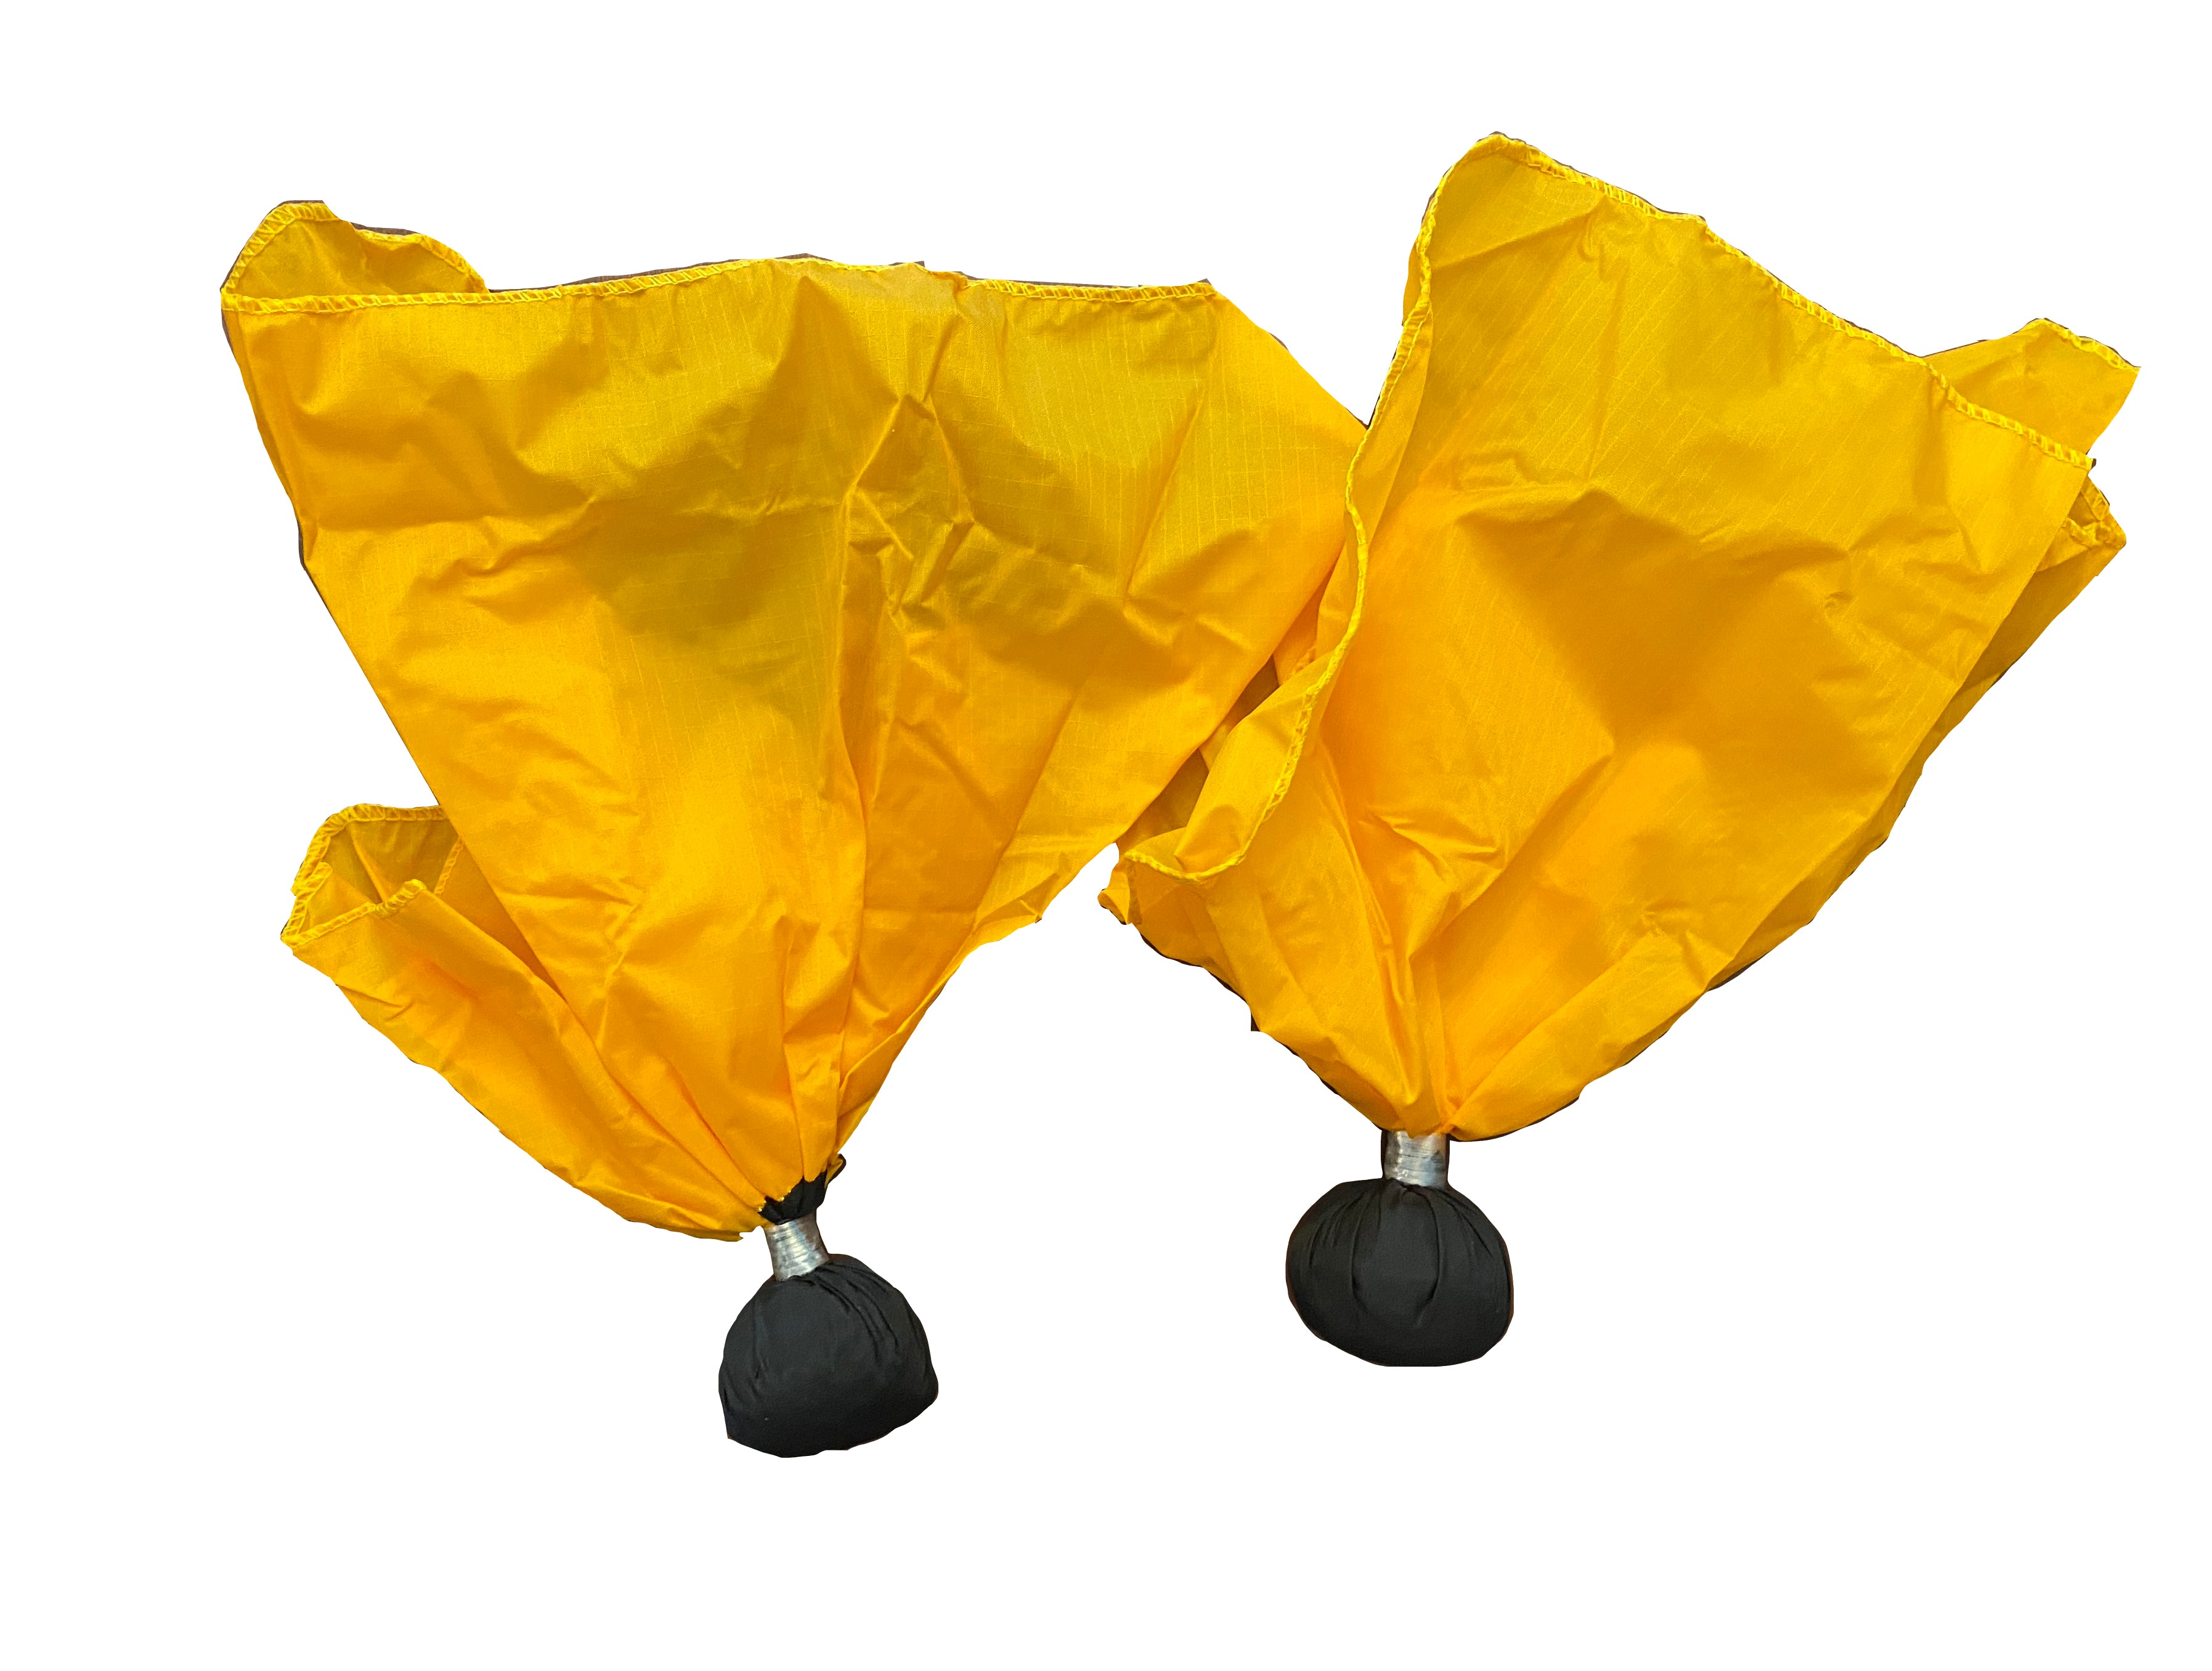 1 Pair of Referee Flags - (contains 2 flags)